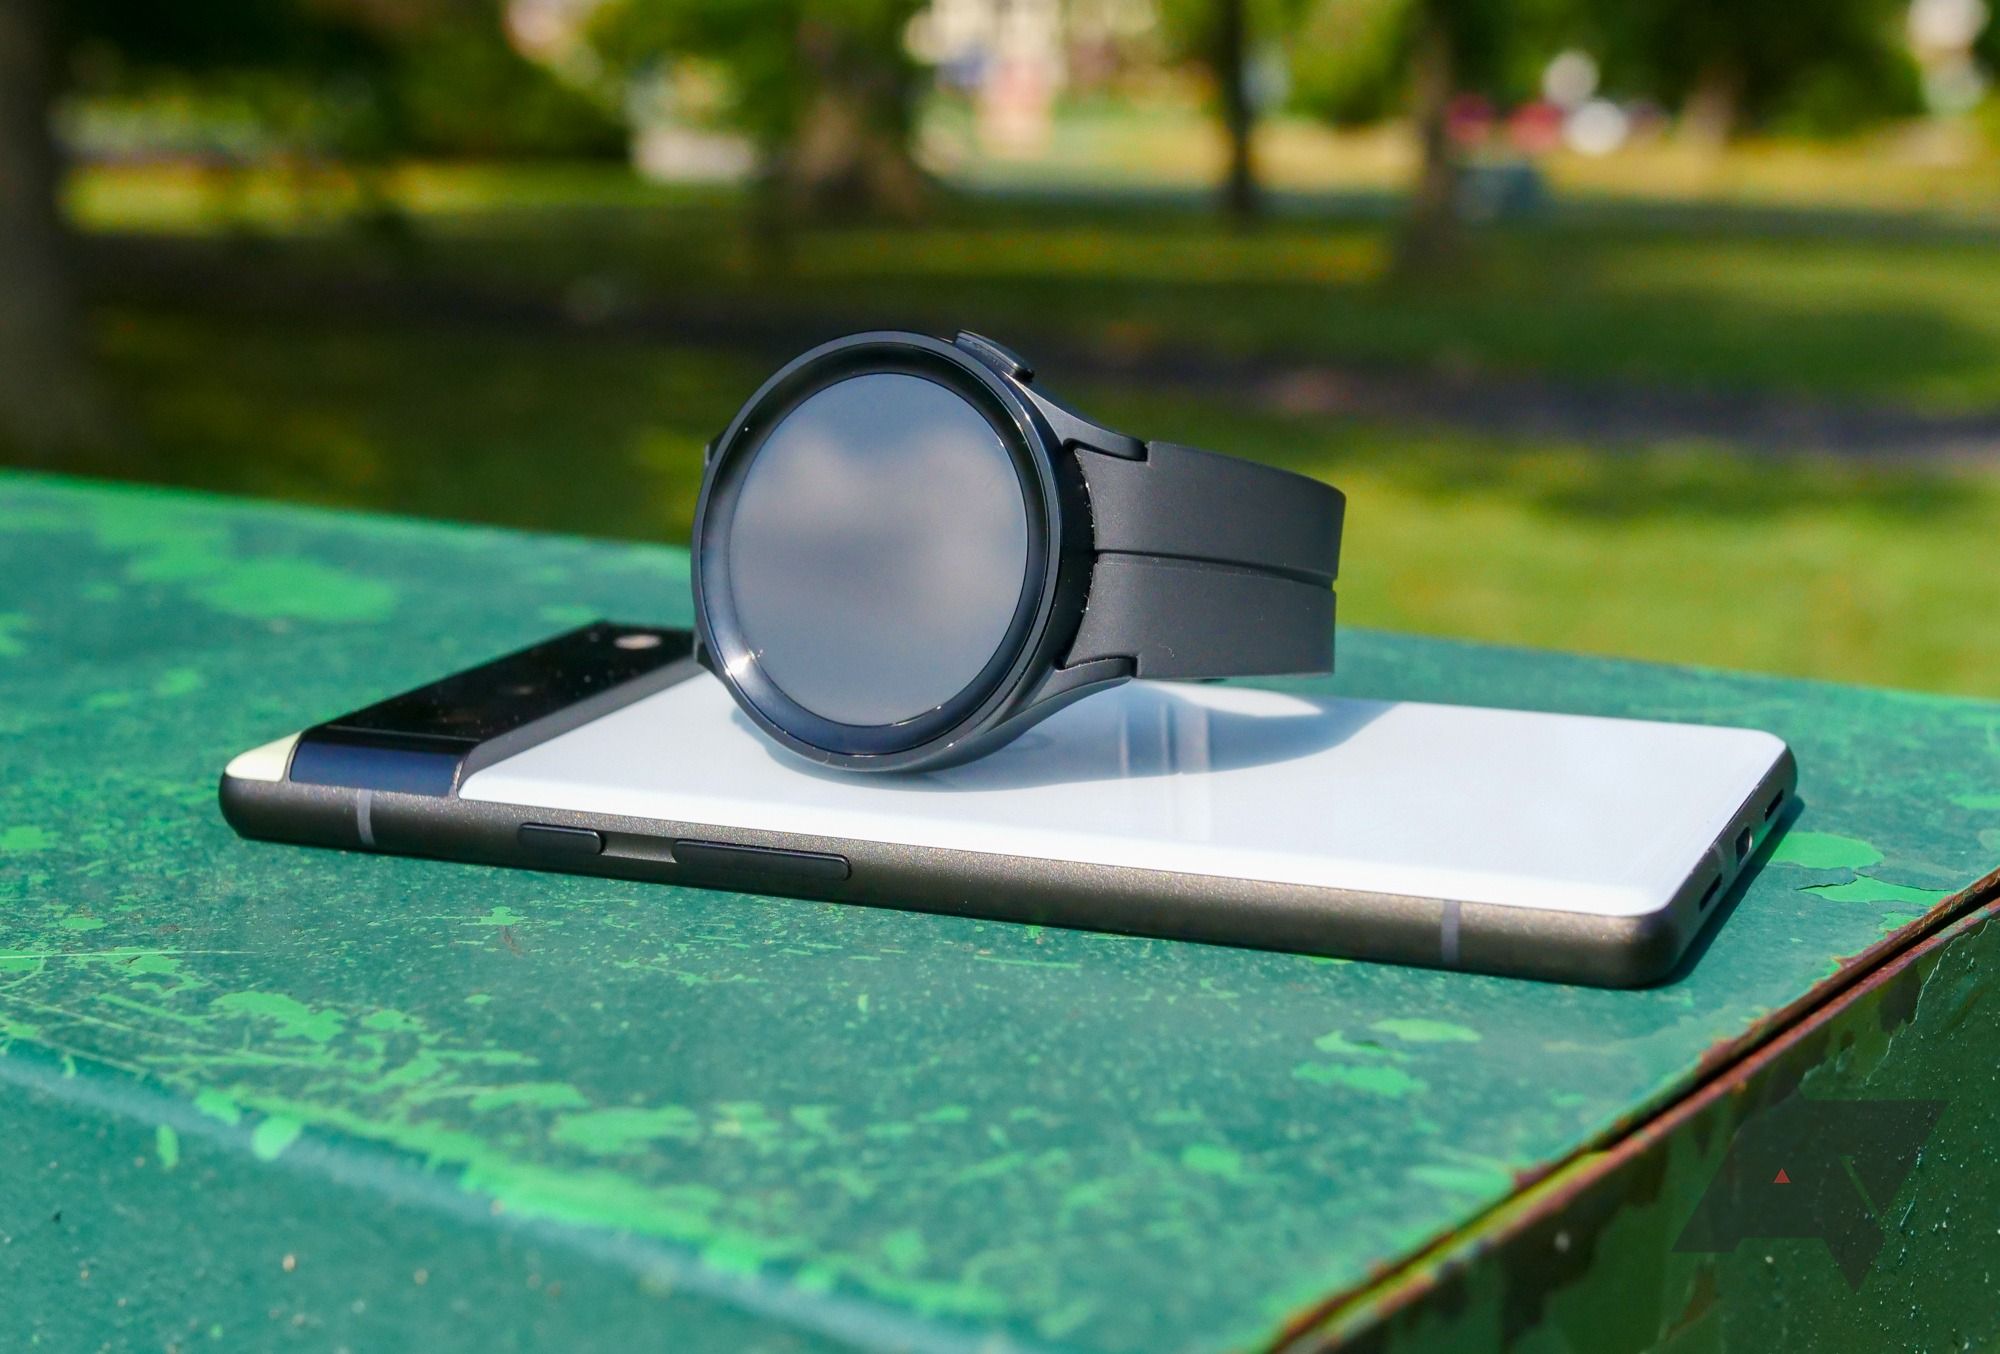 A smartwatch sitting on top of a smartphone on a table in a park.